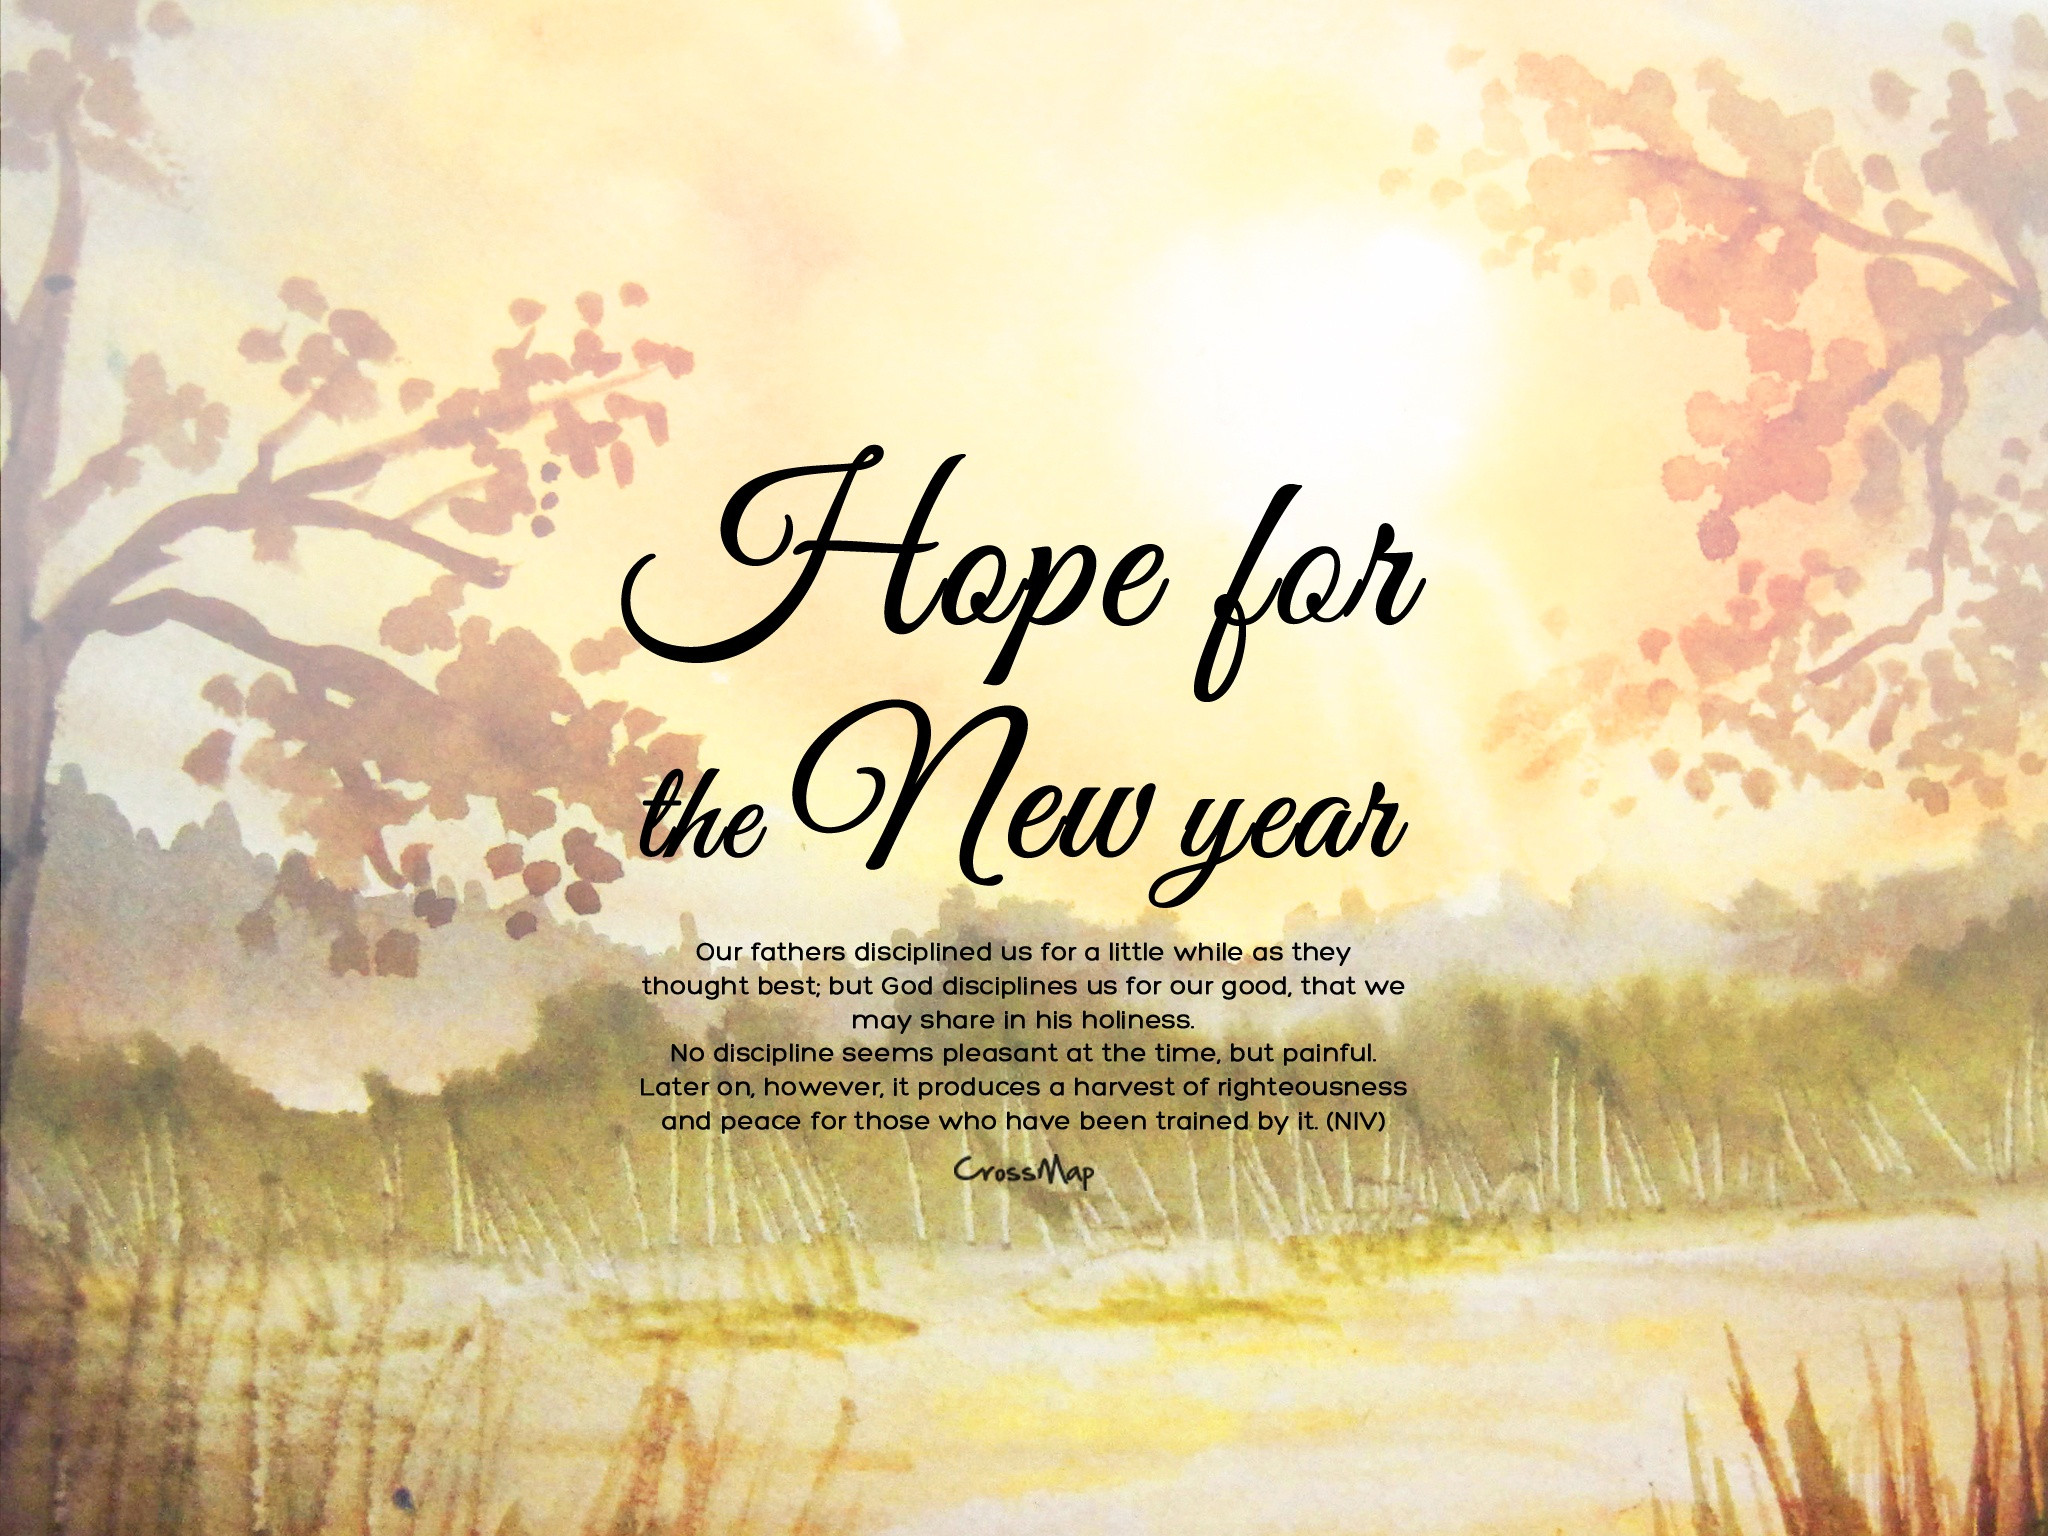 New Year Christian Quotes
 Christian New Year Quotes 2019 Download Daily SMS